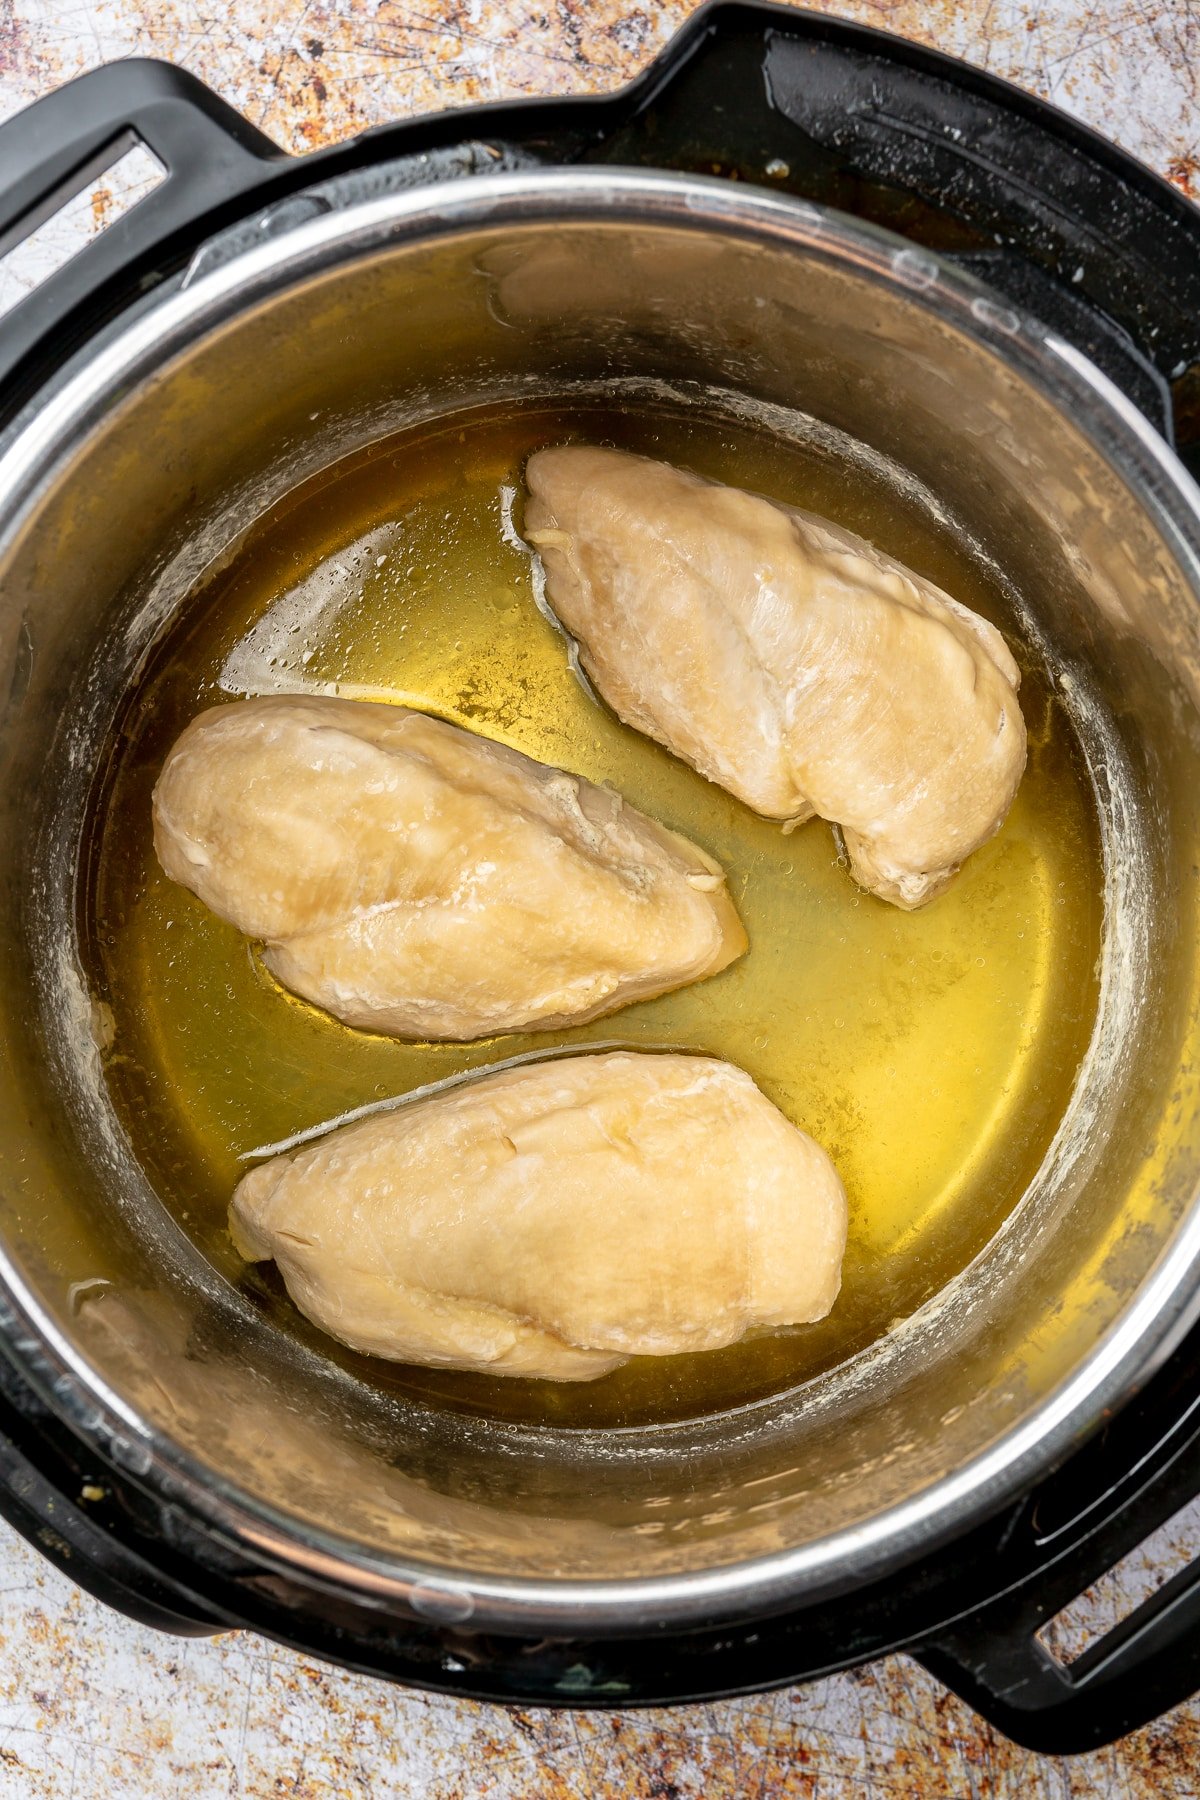 Three chicken breasts sit, surrounded by oil, in a pressure cooker.